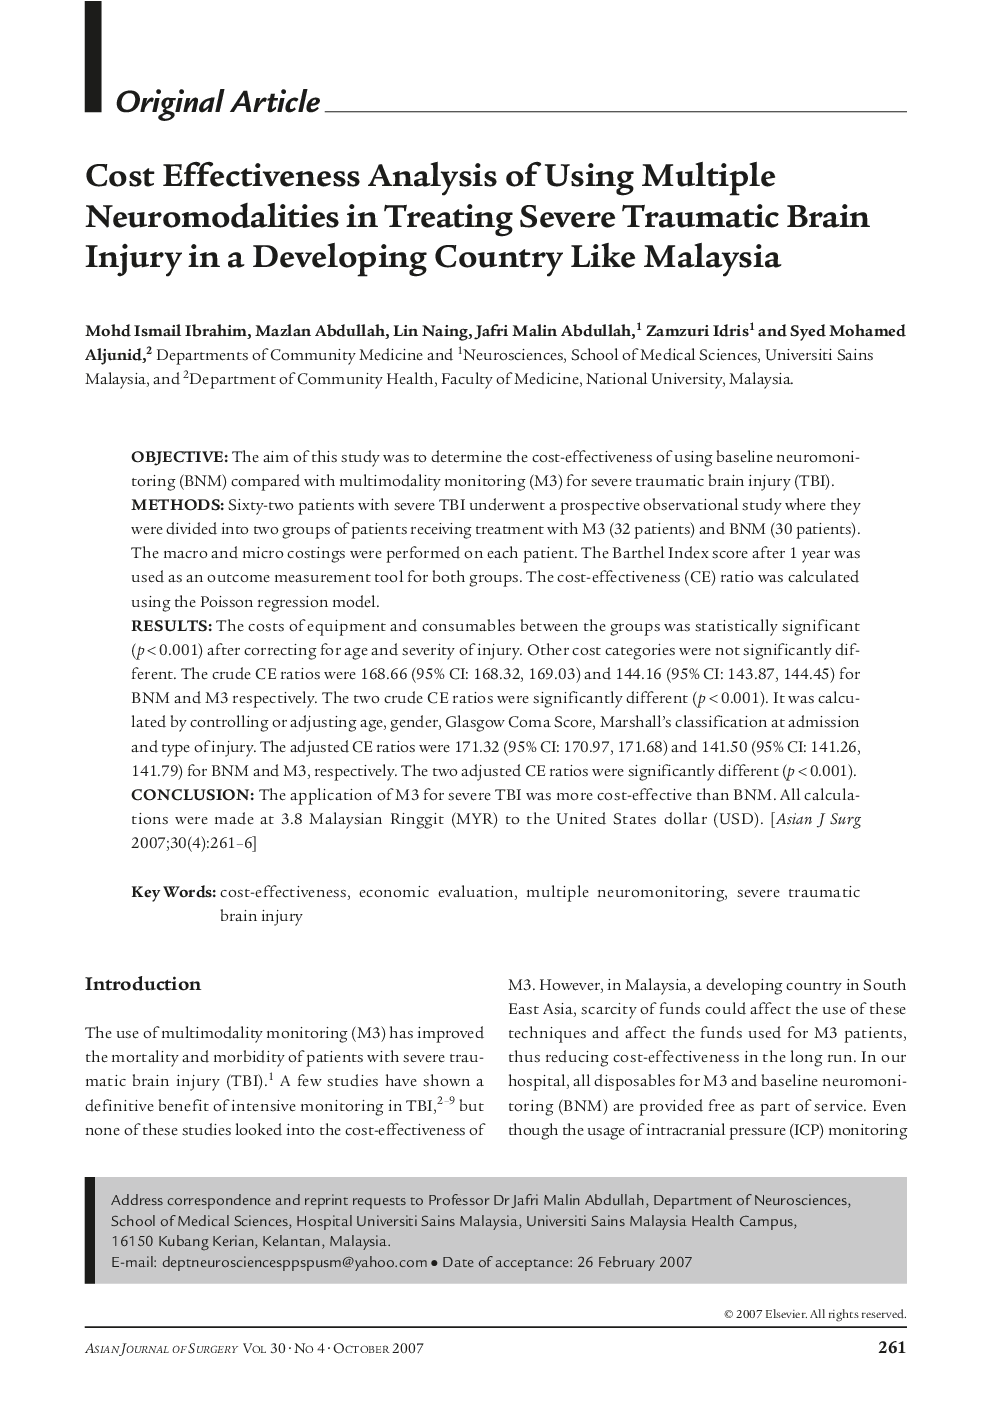 Cost Effectiveness Analysis of Using Multiple Neuromodalities in Treating Severe Traumatic Brain Injury in a Developing Country Like Malaysia